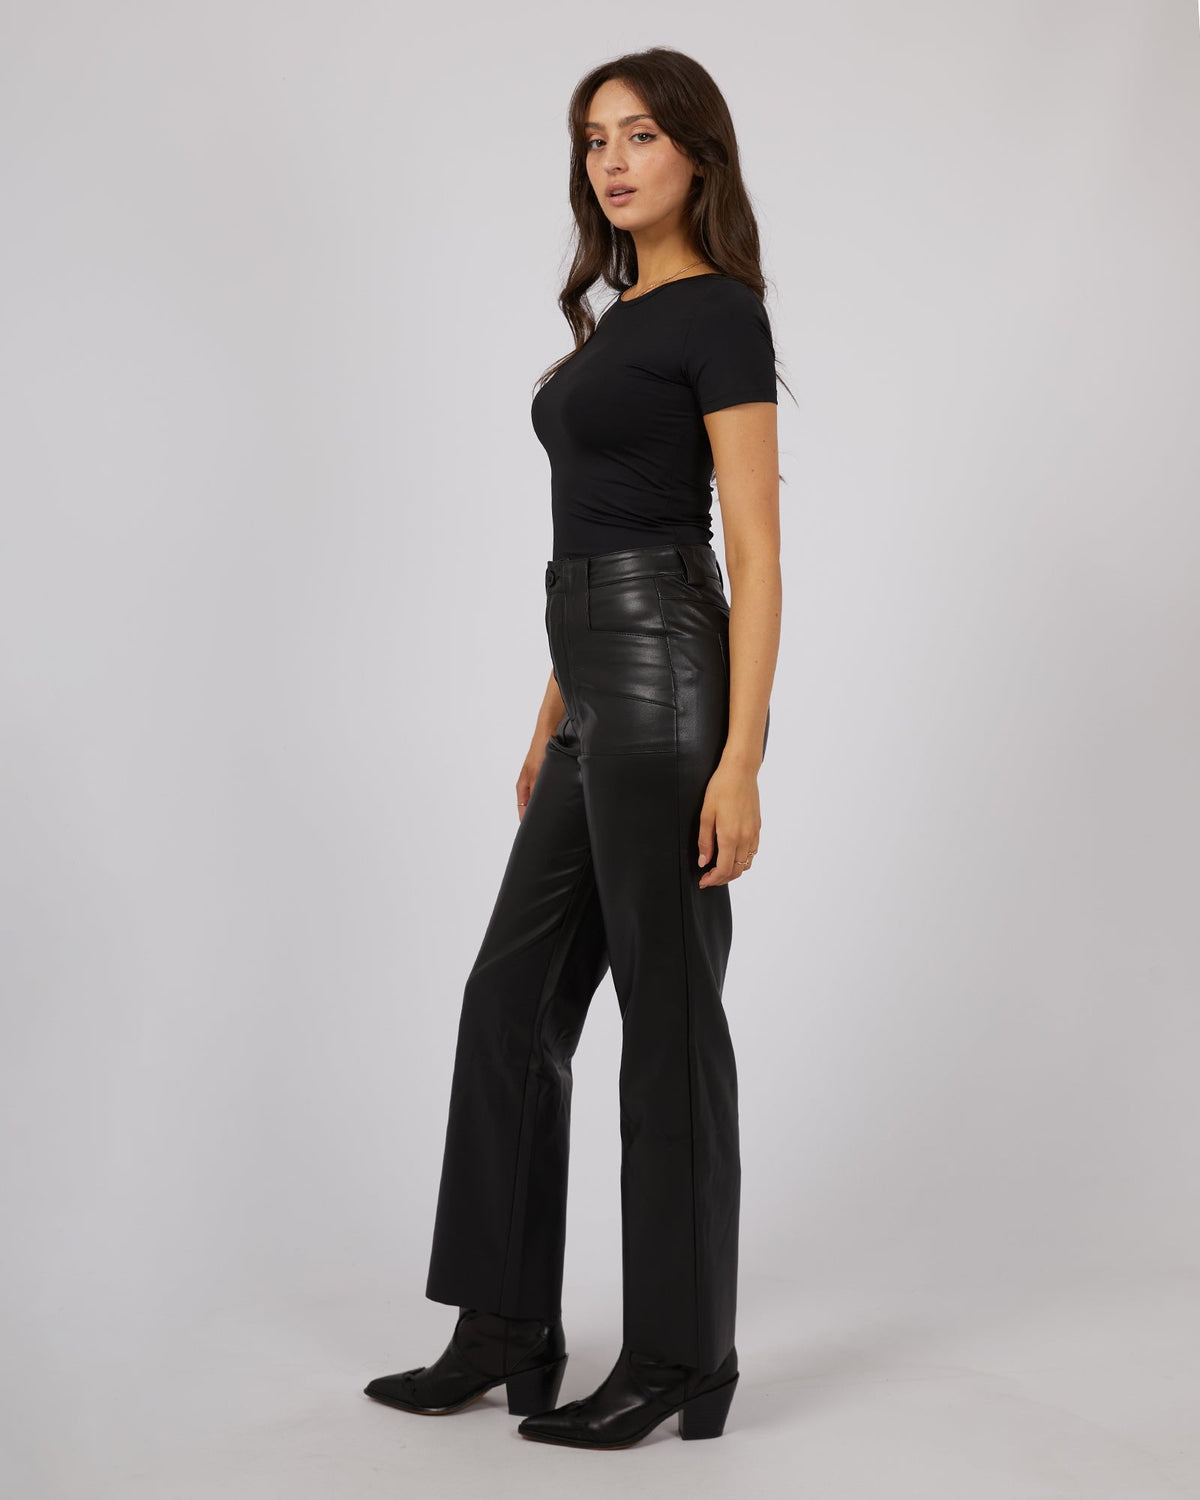 All About Eve-Eve Staple Top Black-Edge Clothing